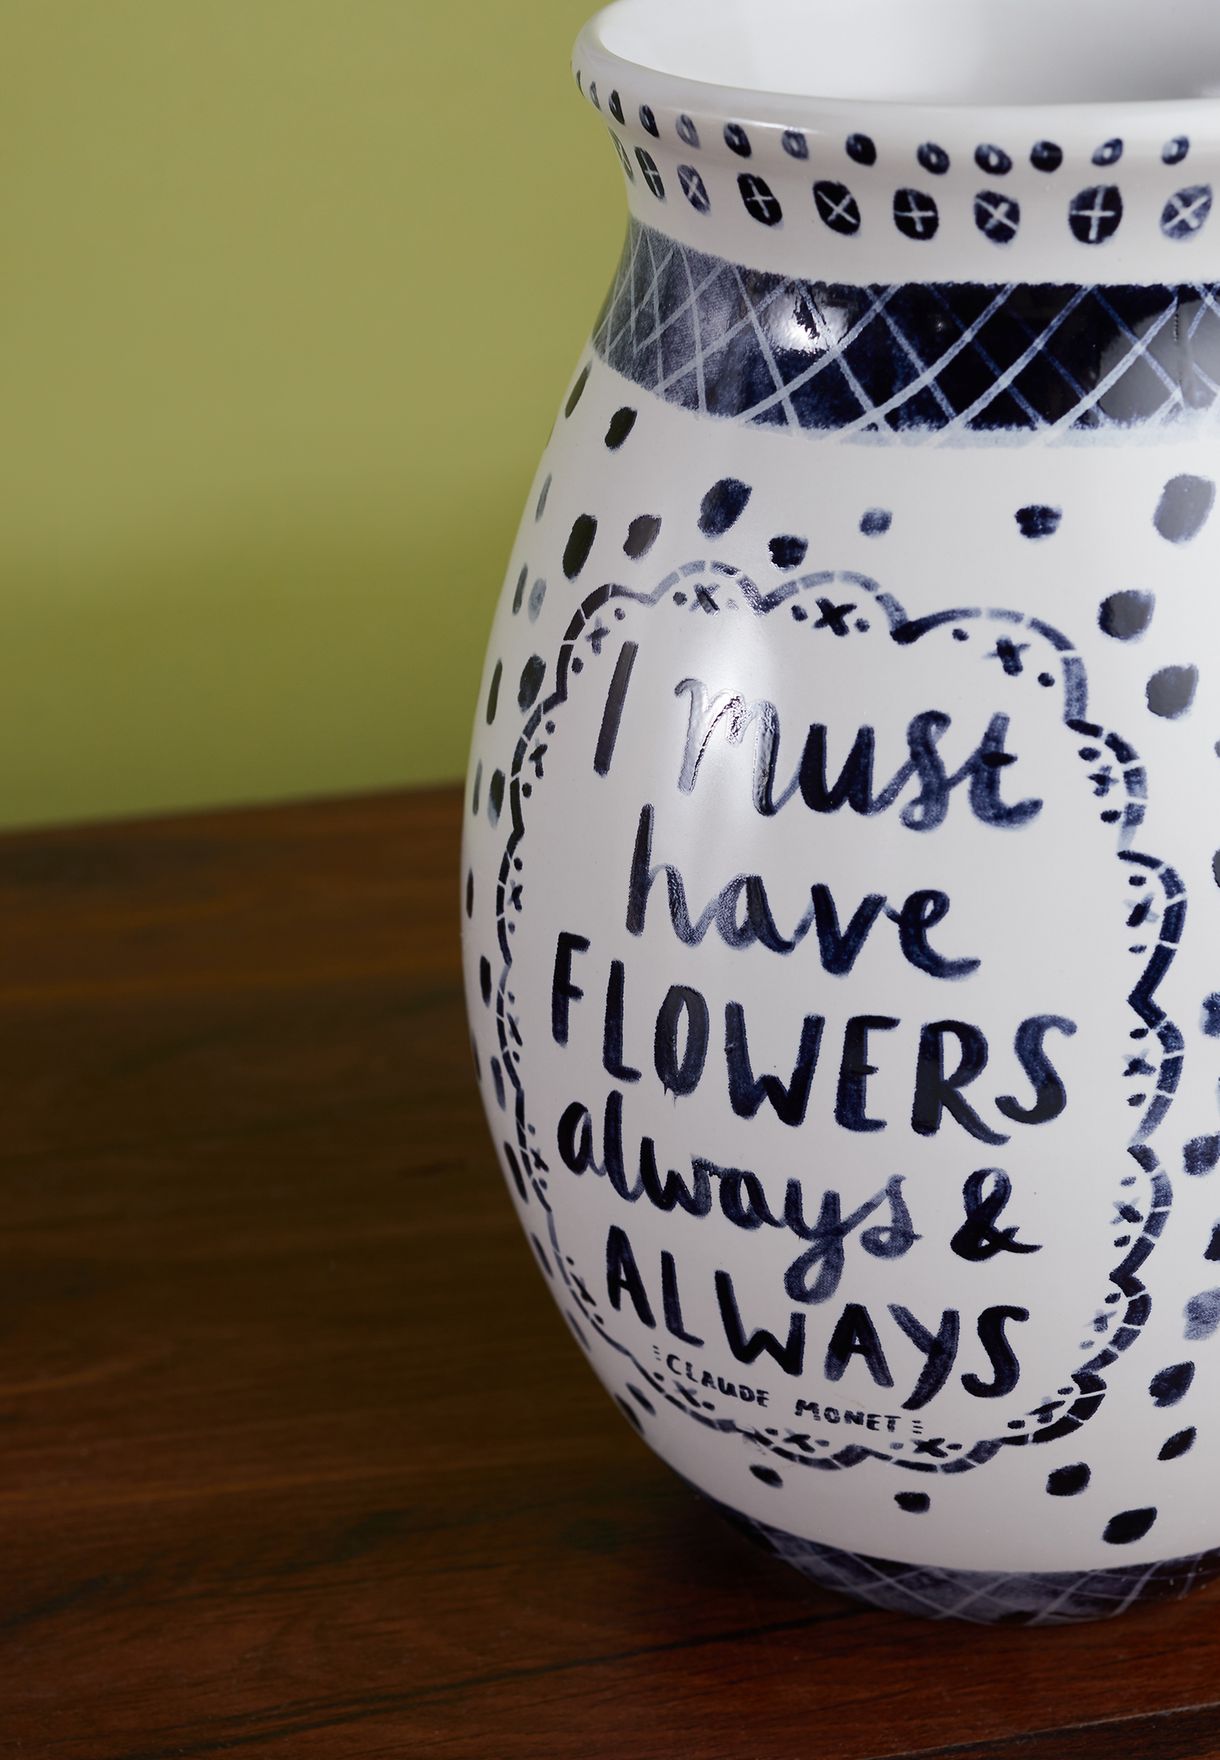 I Must Have Flowers Vase 